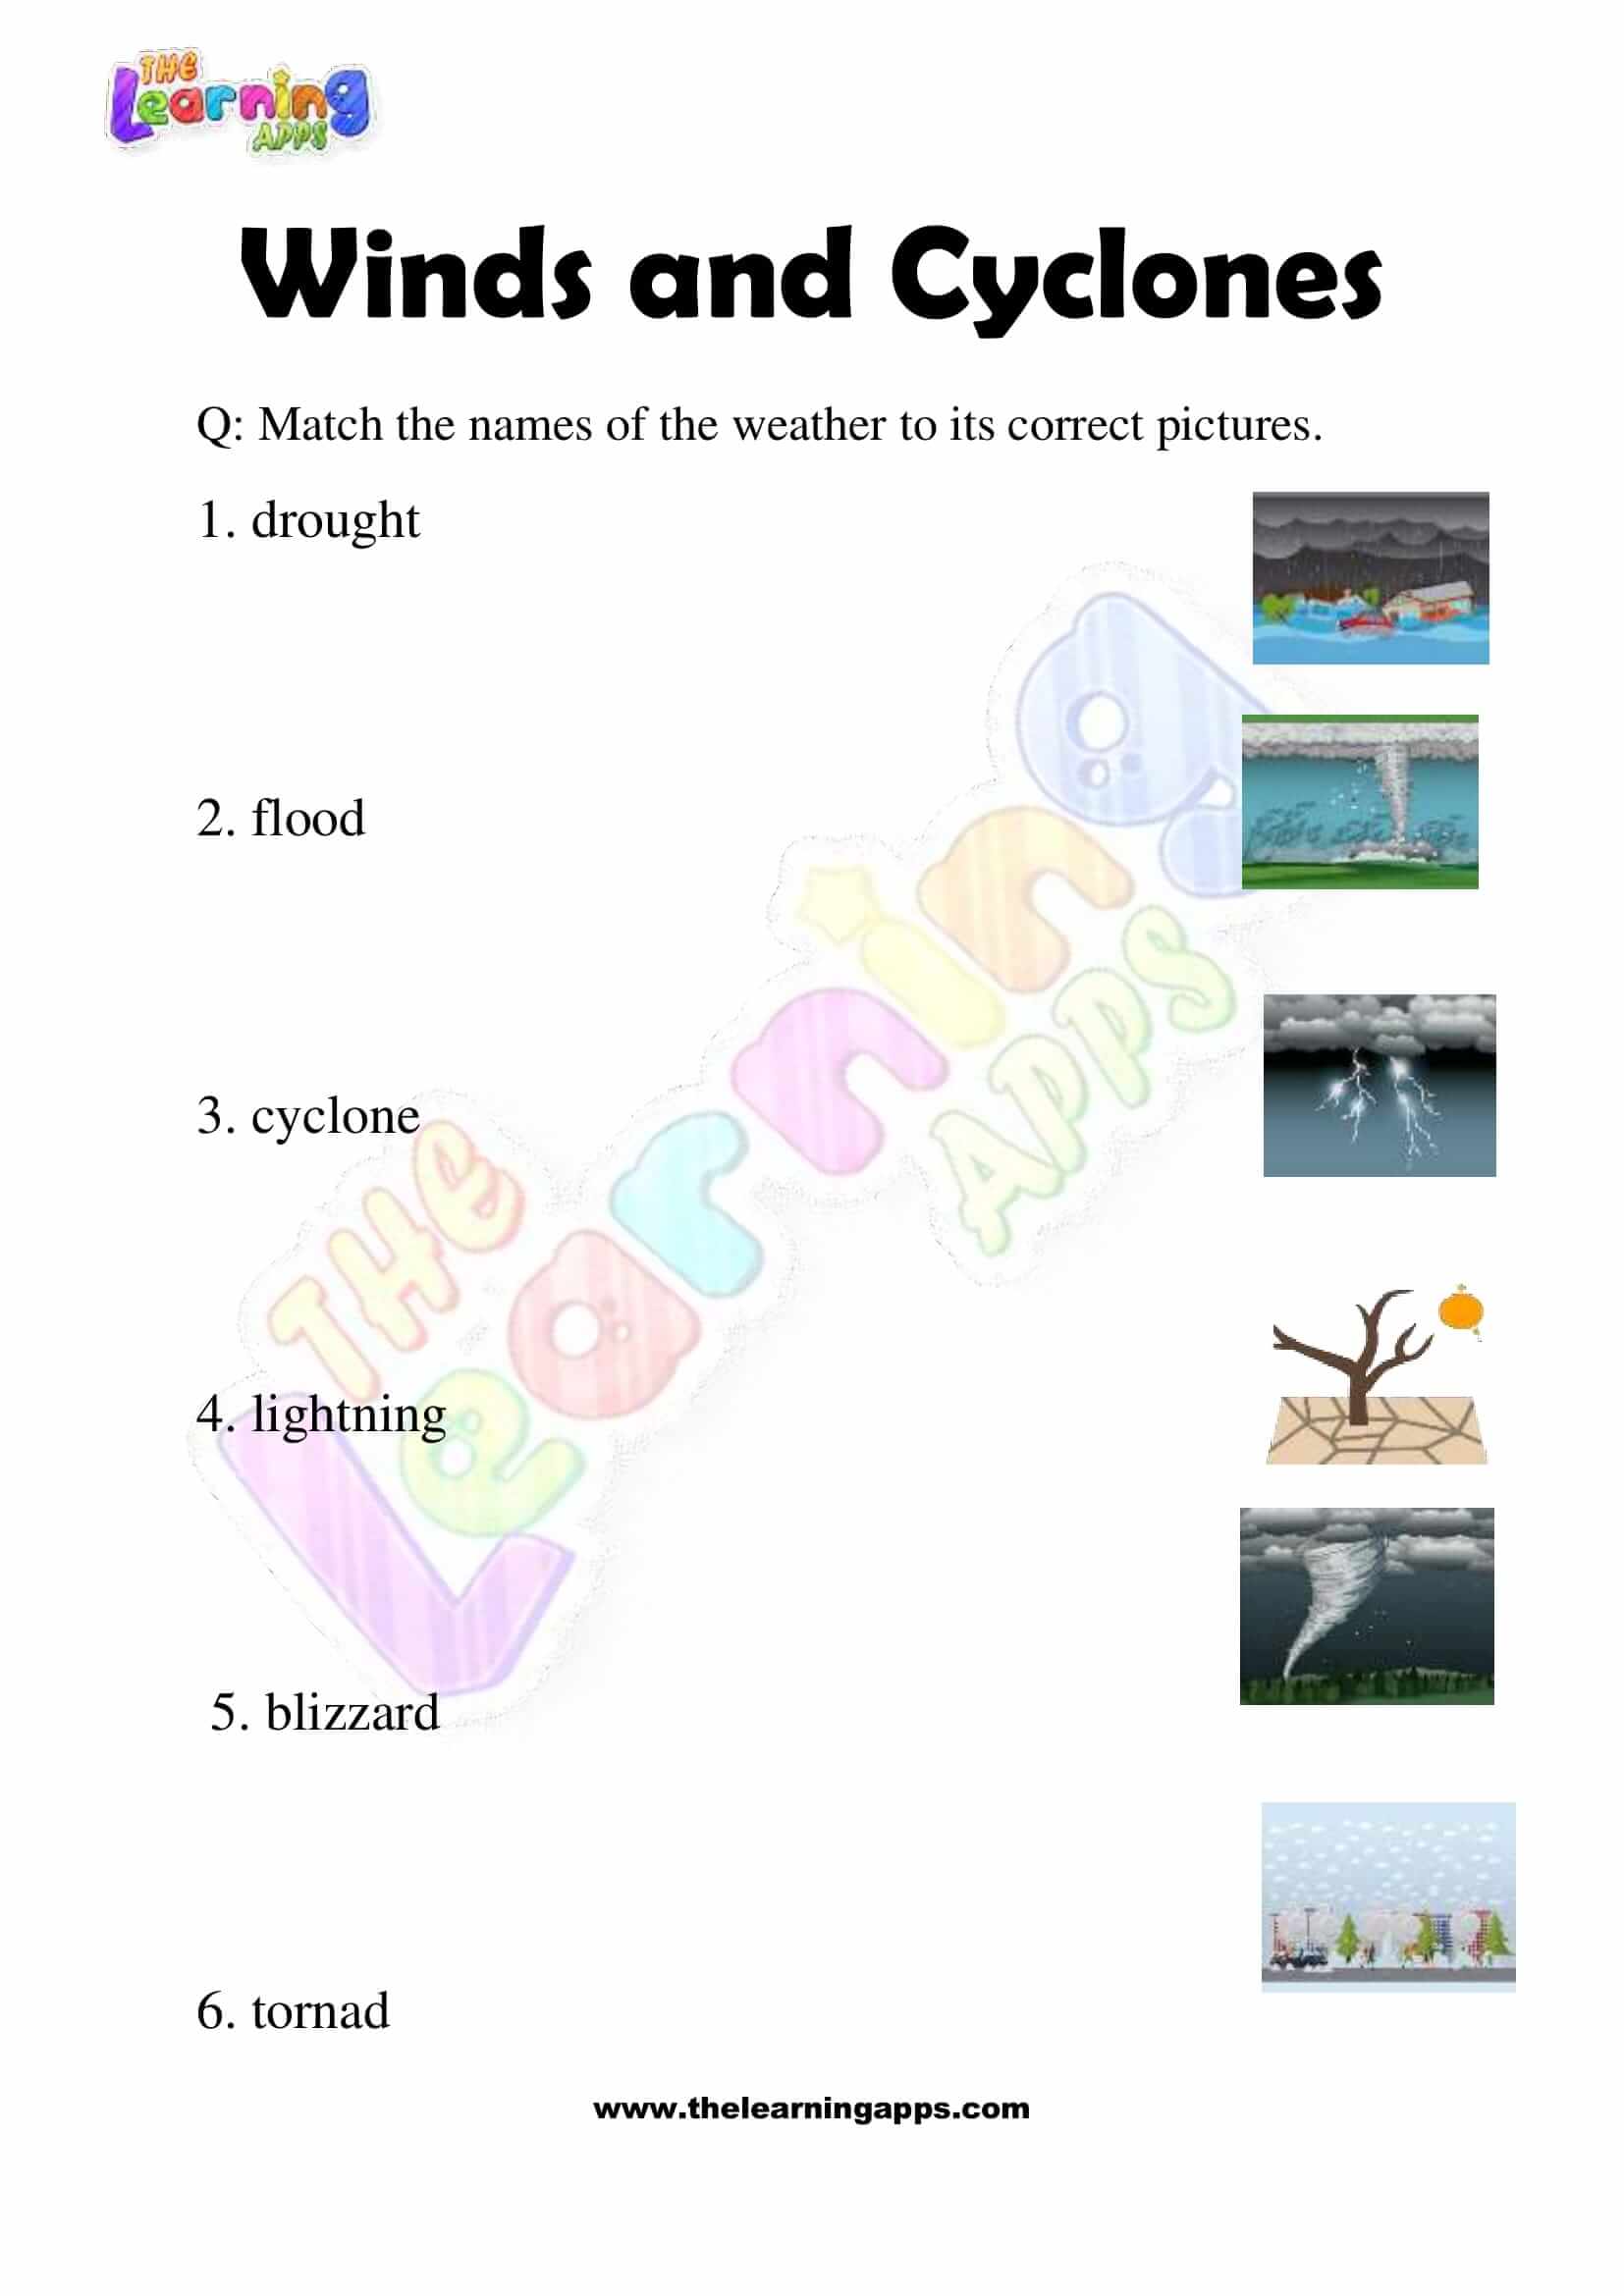 Winds and Cyclones - Grade 2 - Activity 7